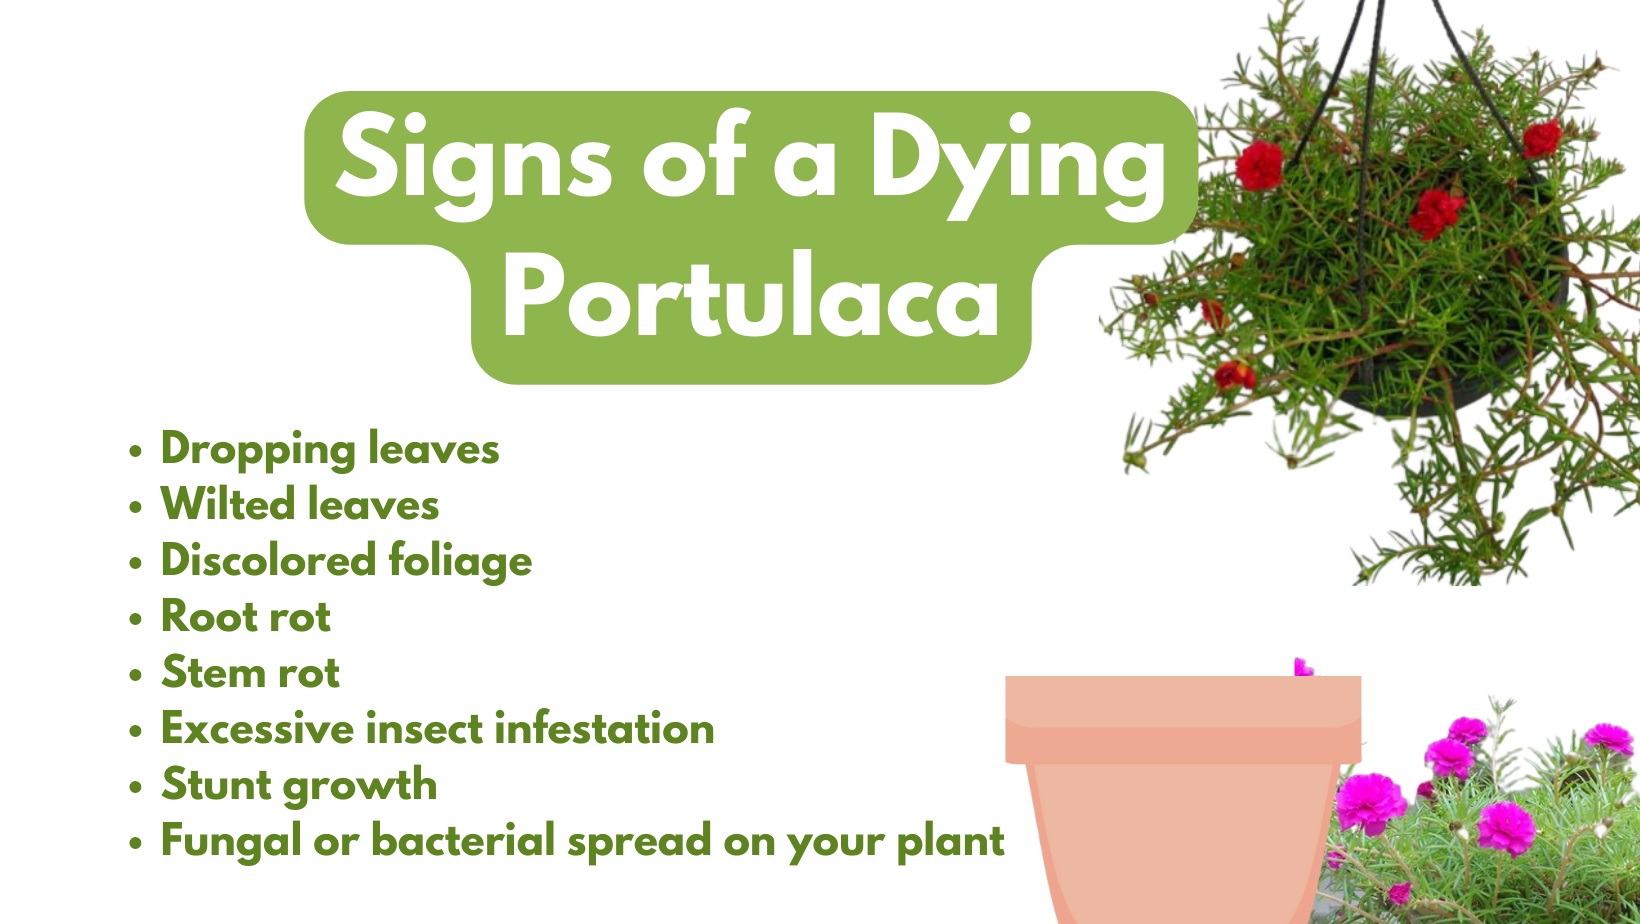 Reasons and Signs of a Dying Portulaca Plant